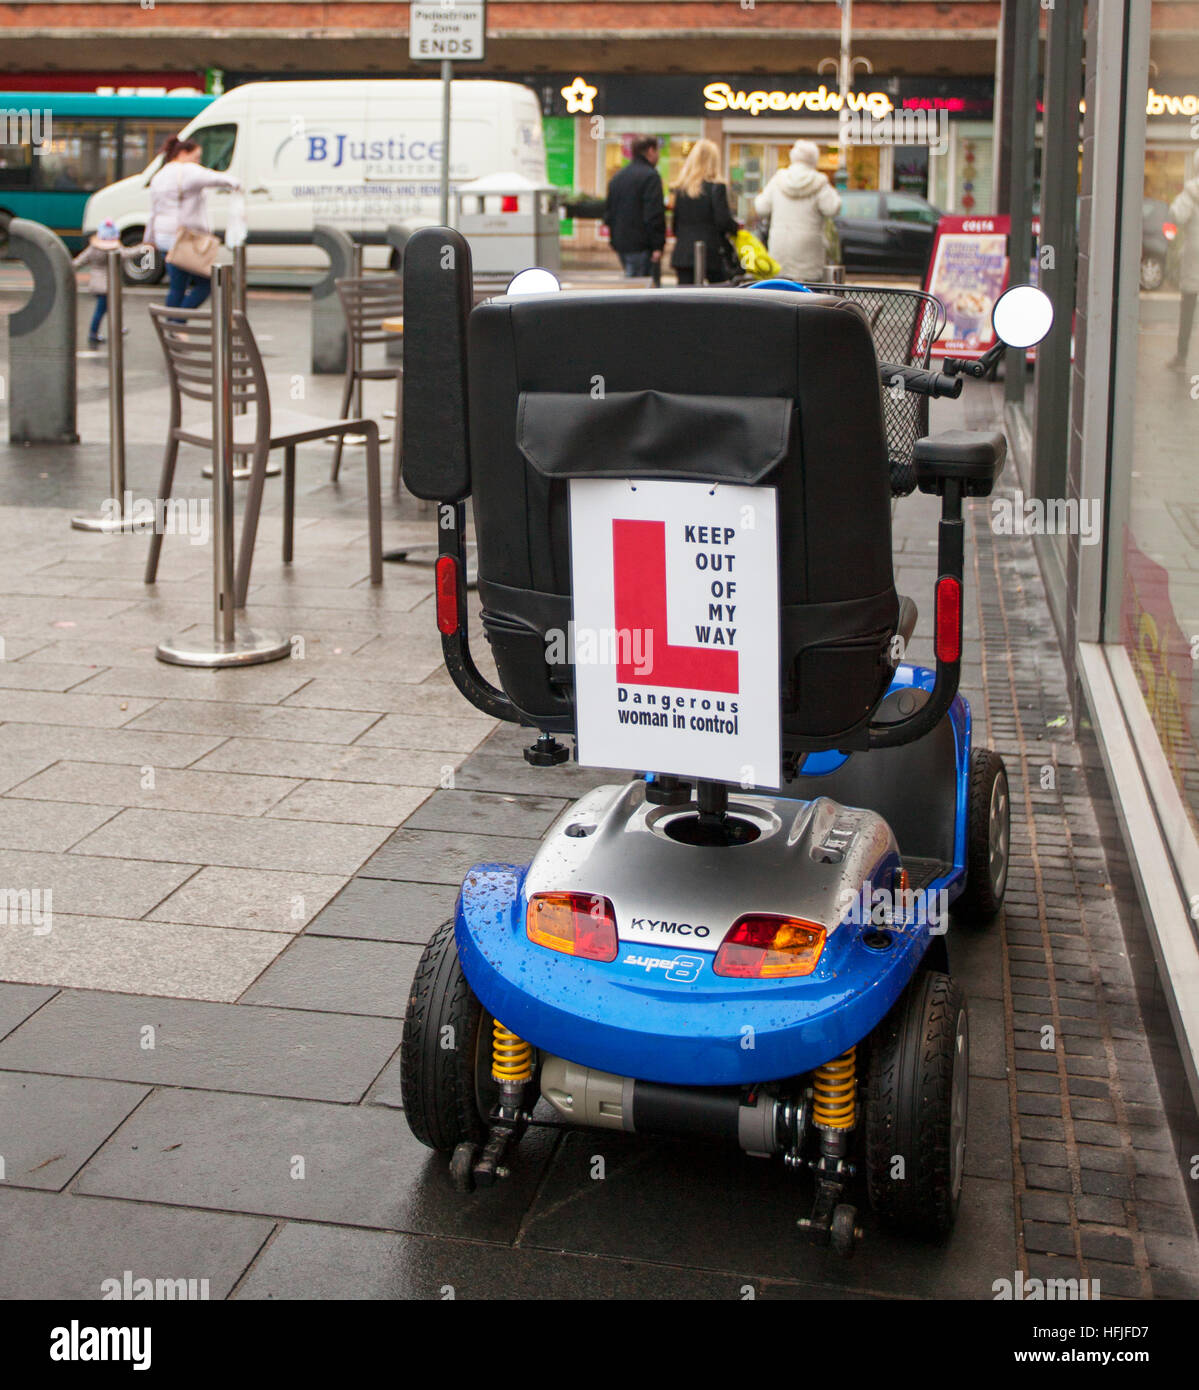 'L Plates' Dangerous woman driver Warning Sign on Mobility Scooter, handicapped transport, battery powered, wheelchair user, retirement vehicle in Chapel Street, Southport, Merseyside, UK Stock Photo